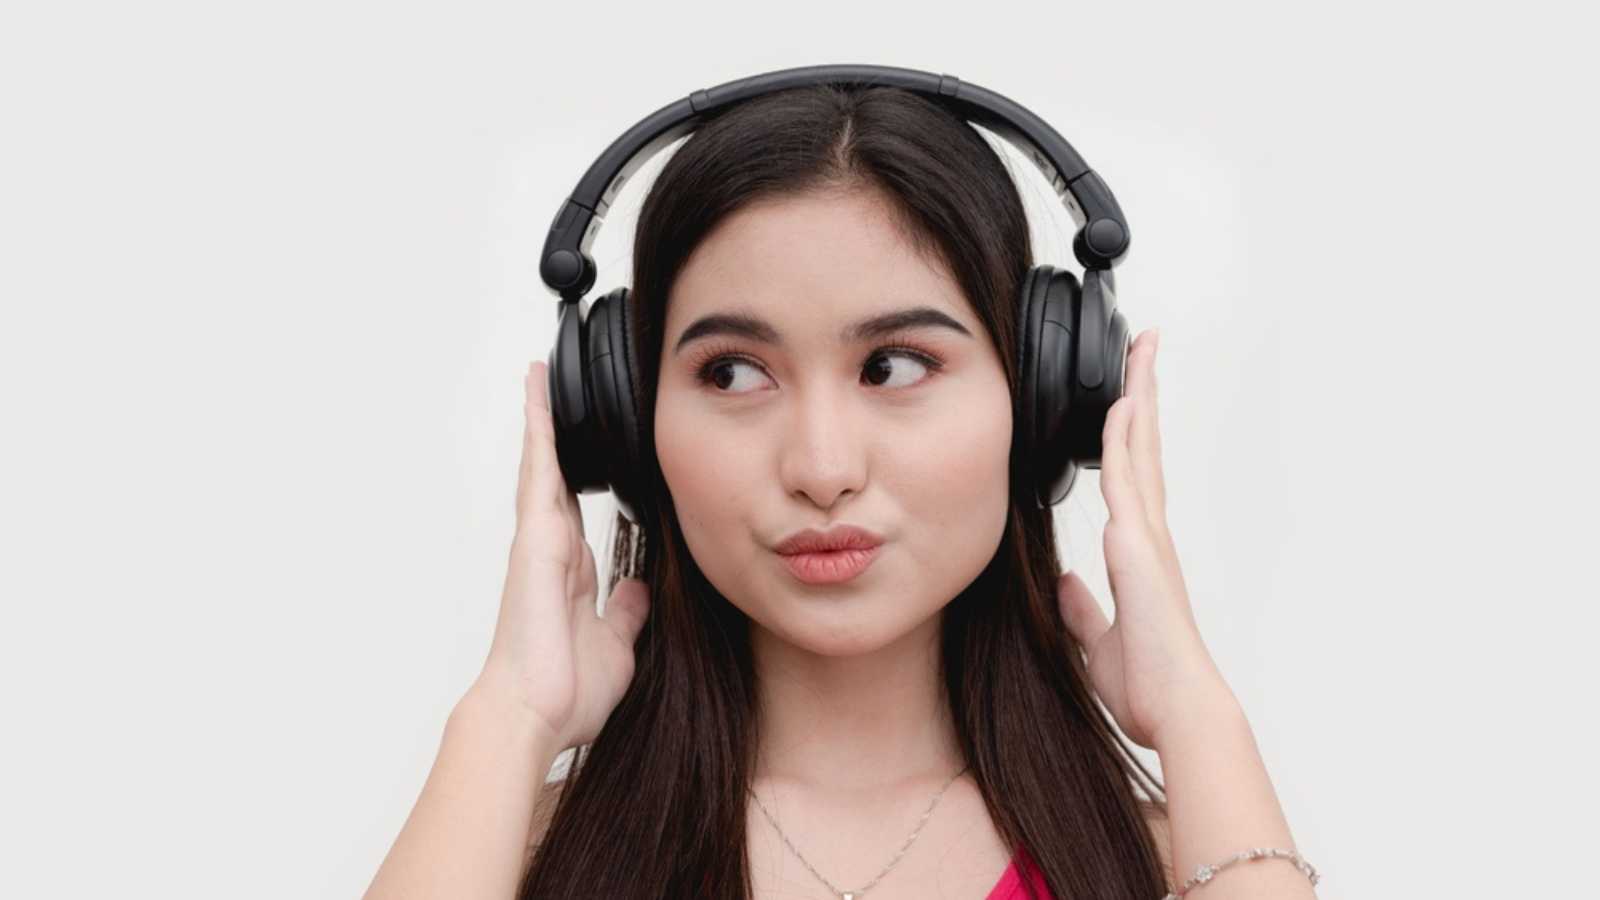 Woman Hearing Pop Song With Headphone